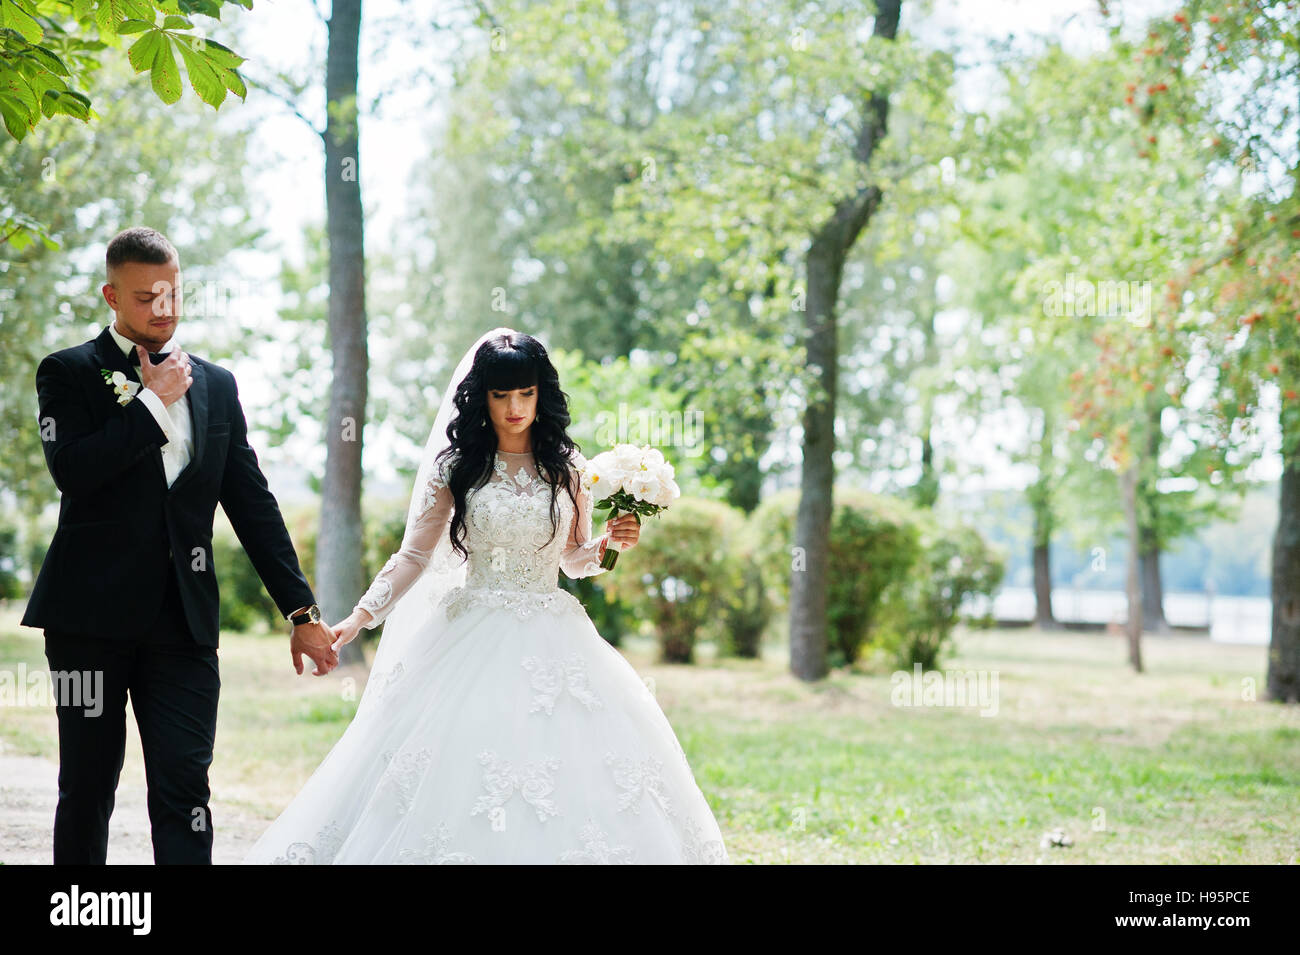 Great wedding couple walking on park holding hands. Stock Photo